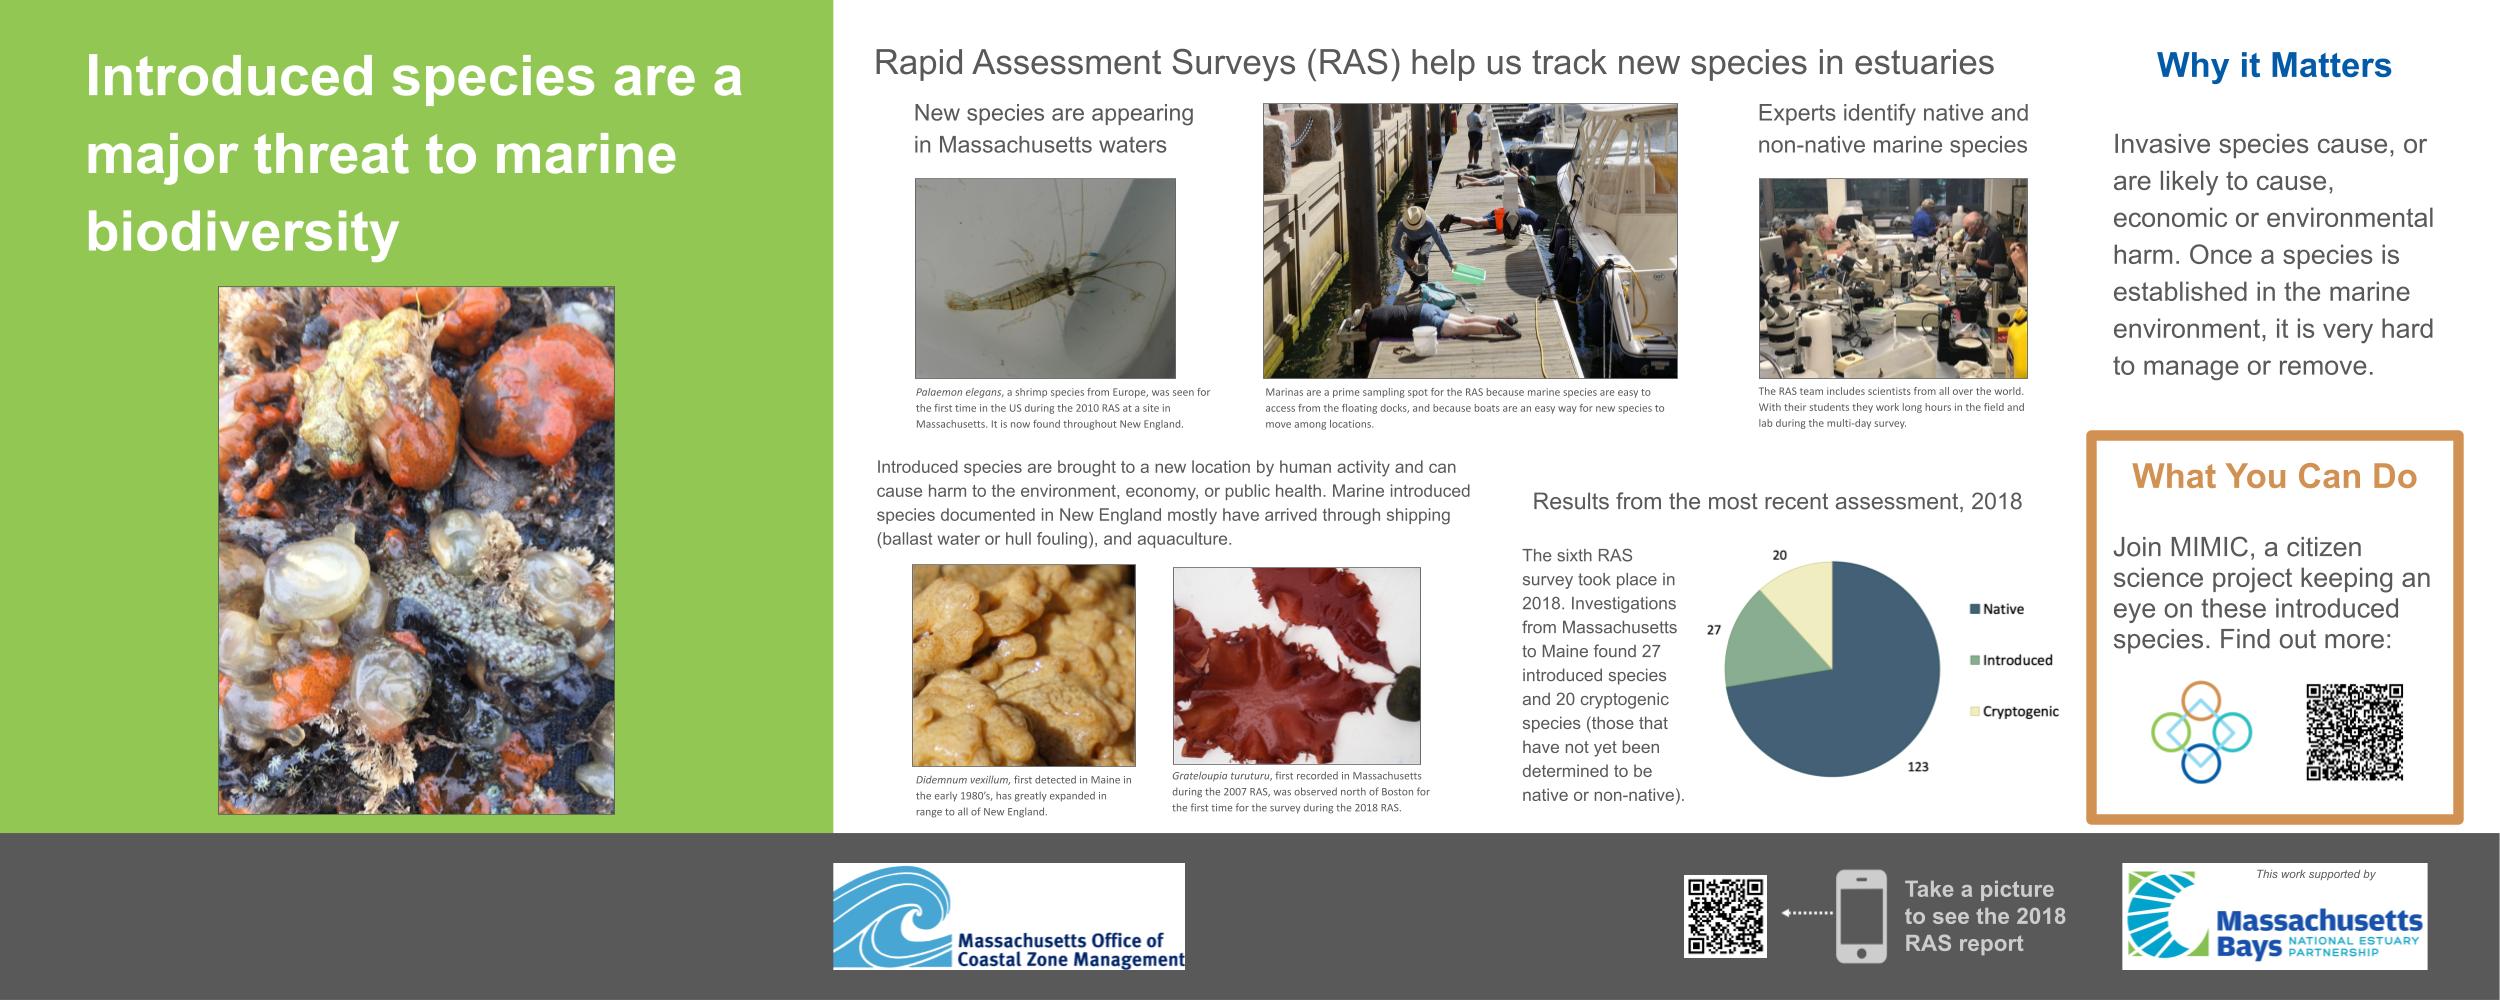 Poster shows some example of invasive species and results of the 2018 assessment.